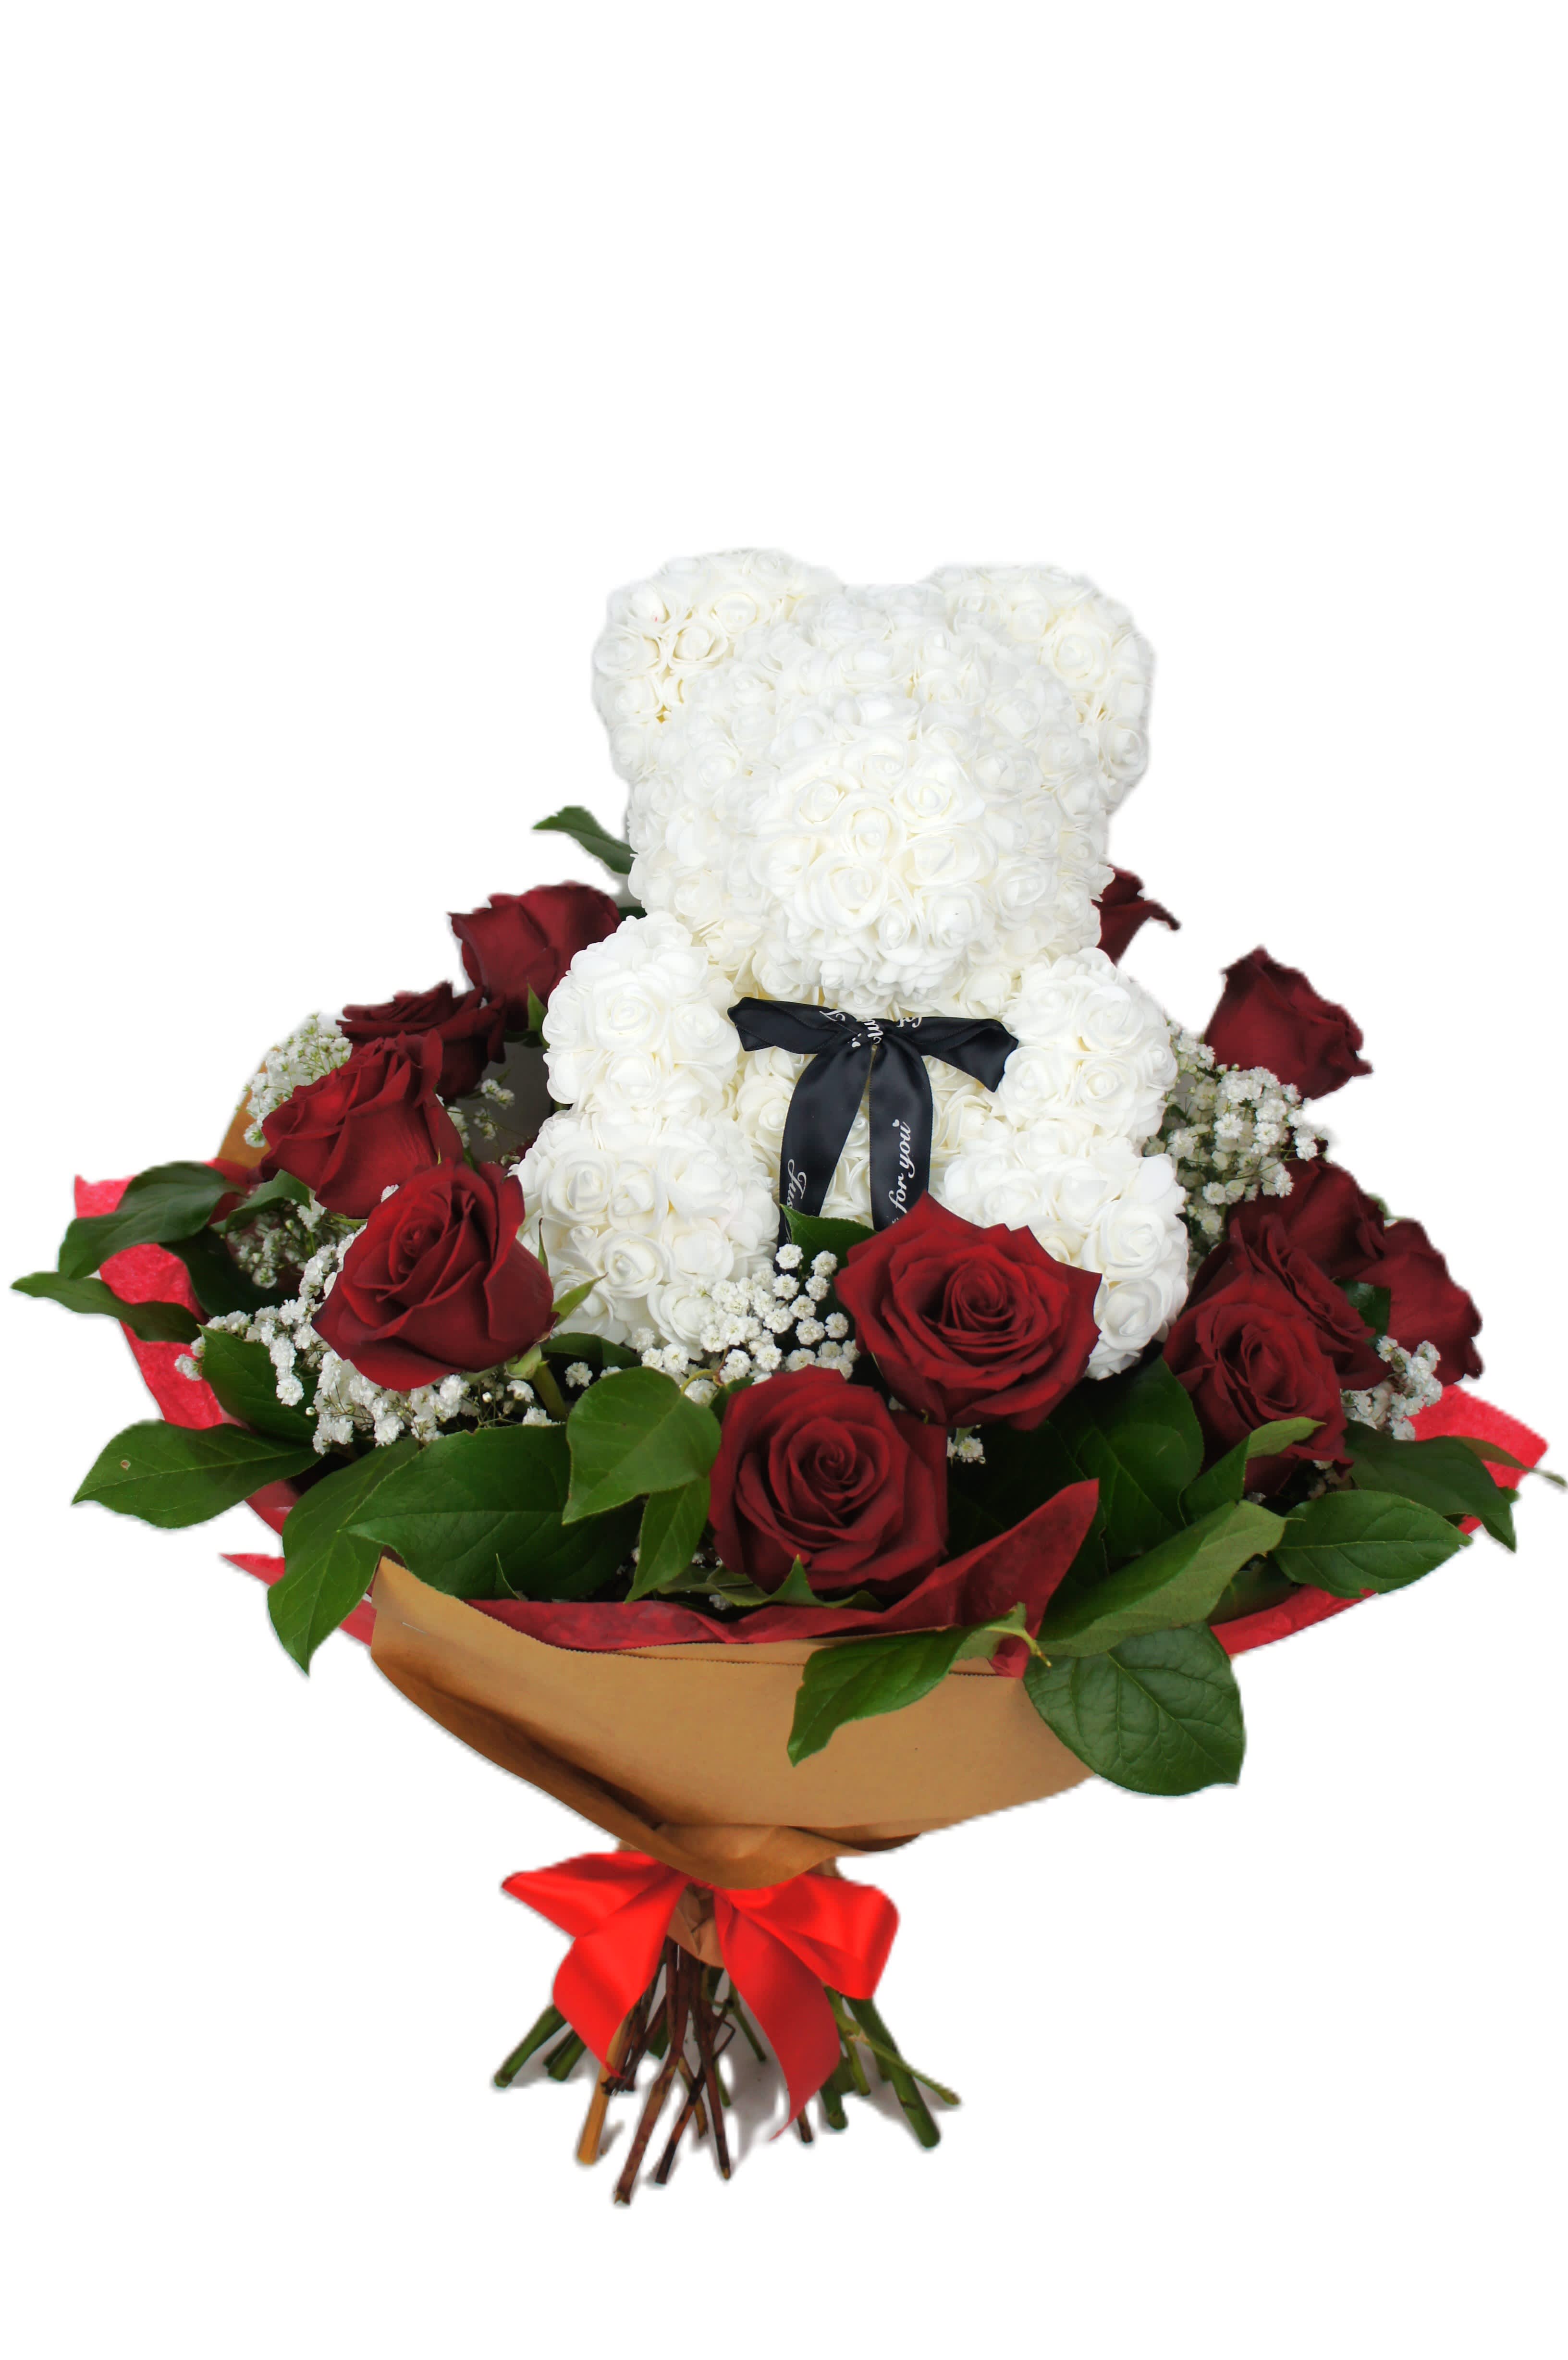 Bear love - A bouquet made of 12, 24, or 36 roses, a mix of greens and fillers with a foamy roses bear on top